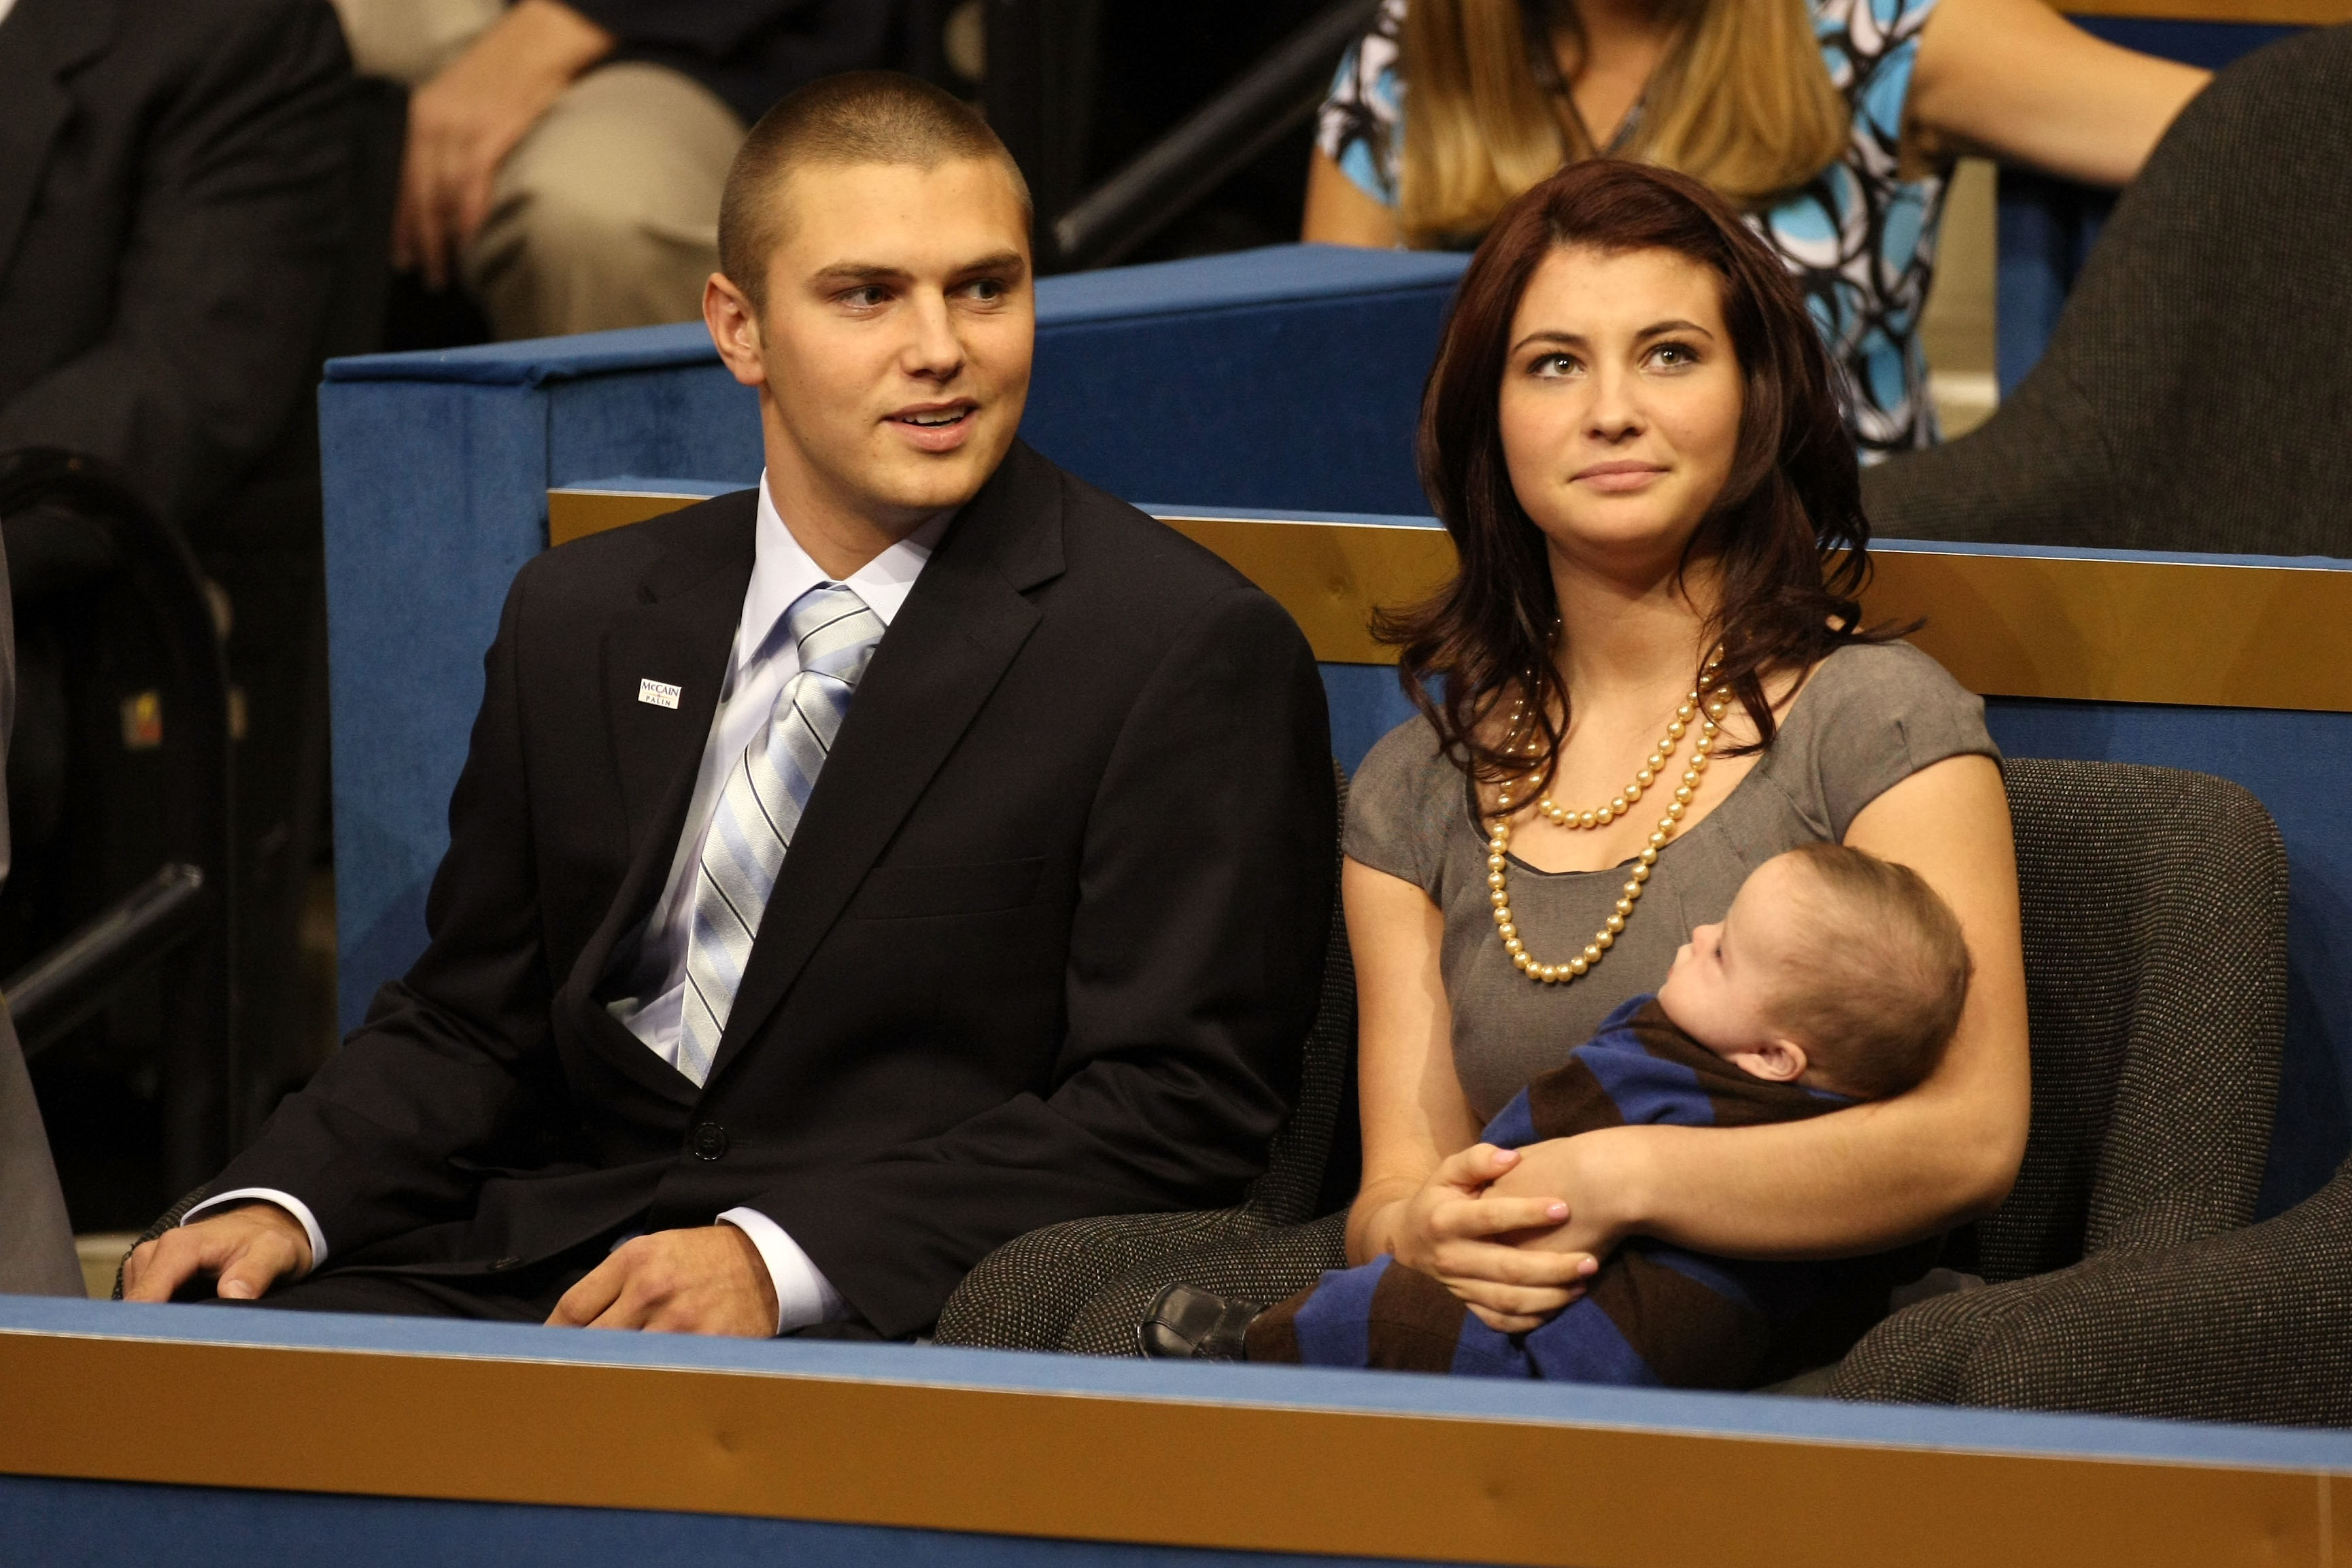 Track Palin sits with Willow Palin holding Trig Palin at the Republican National Convention (RNC) on September 3, 2008 in St. Paul, Minnesota. (Getty Images)